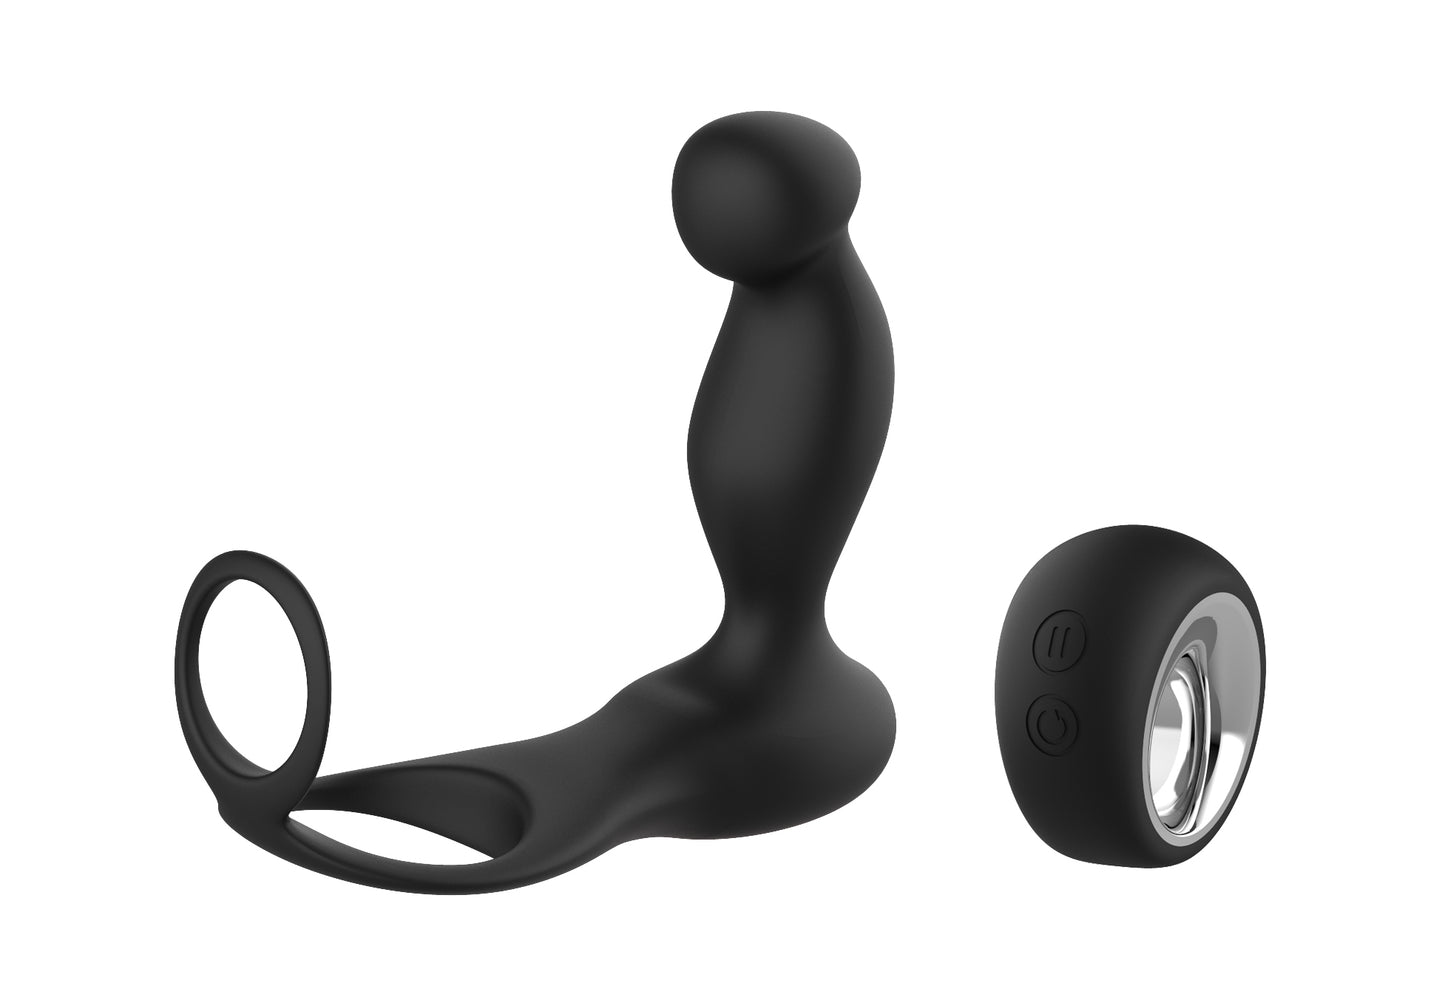 Prostate Massager Abate - Just for you desires